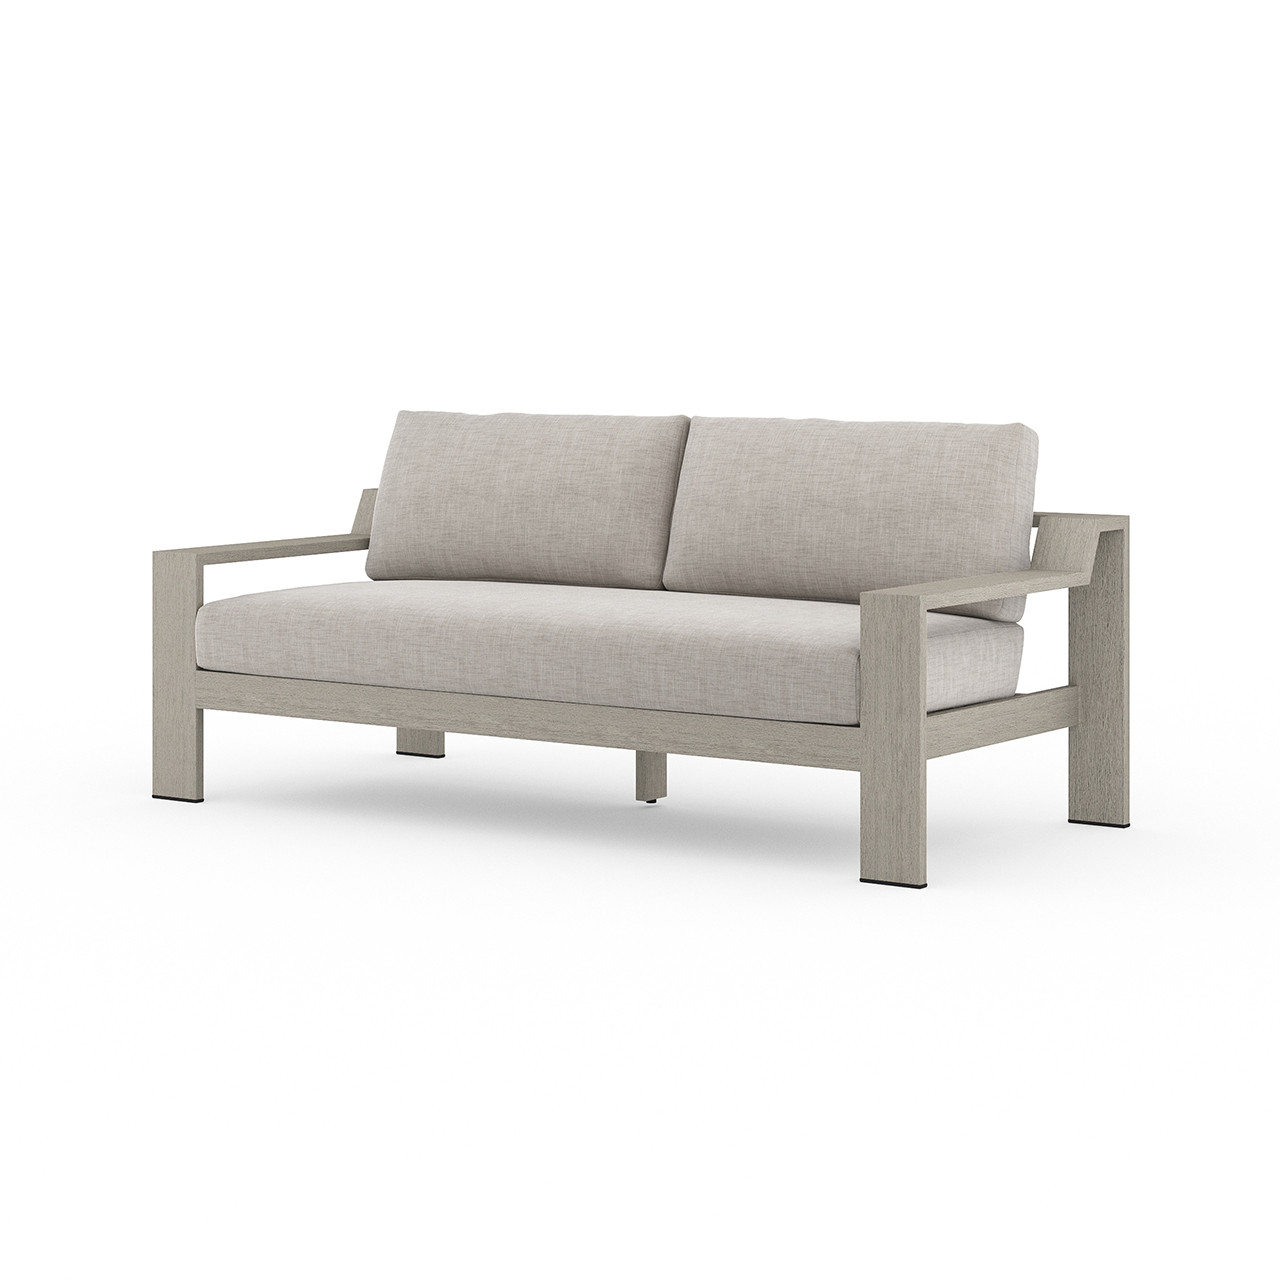 Hope Ranch Teak Outdoor Sofas - Weathered Grey